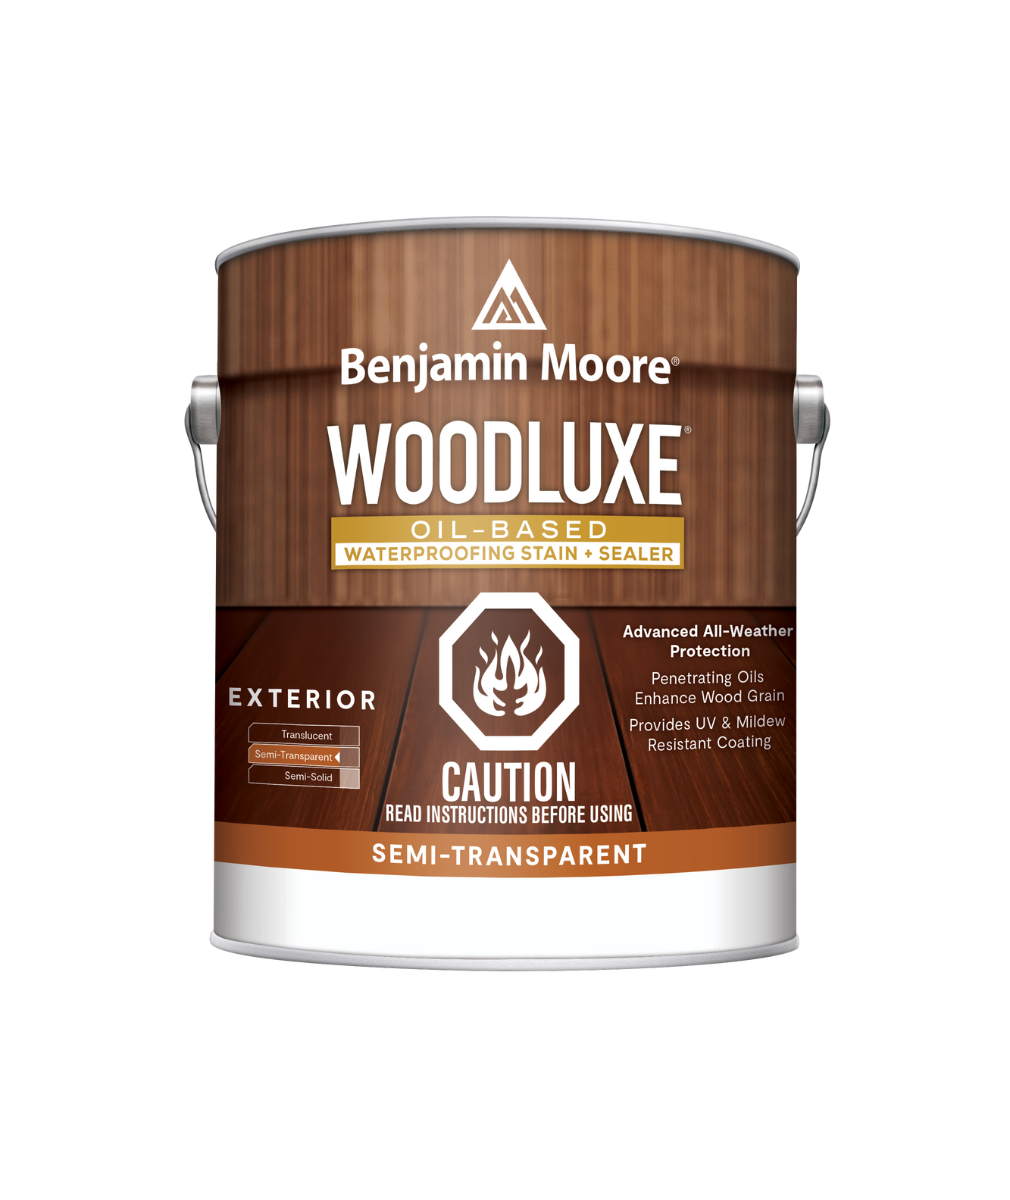 Benjamin Moore Woodluxe® Oil-Based Semi-Transparent Exterior Stain available to shop at Regal Paint Centers in Maryland, Virginia and DC.